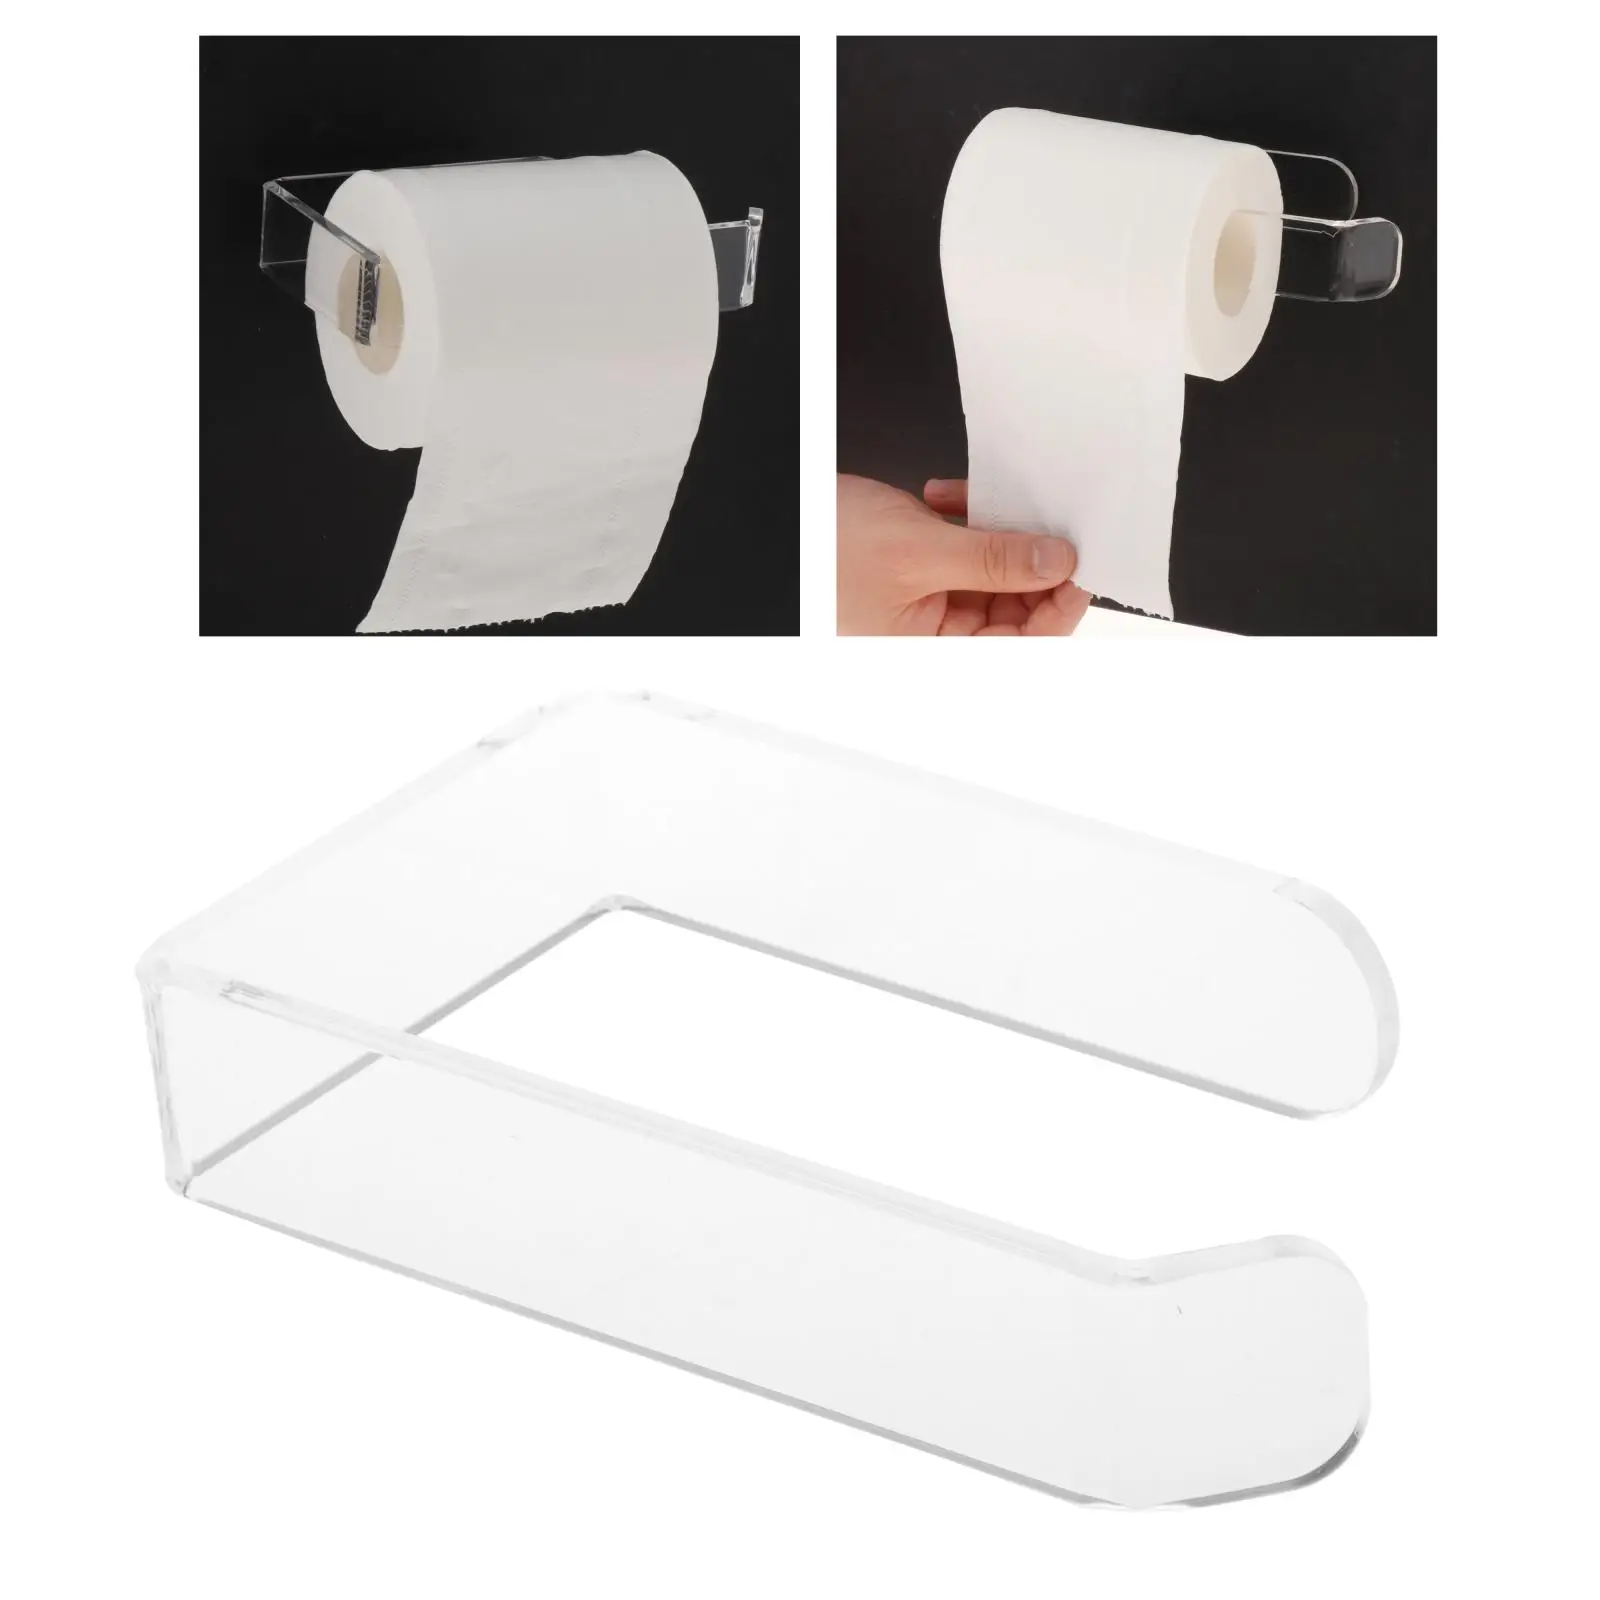 Acrylic Transparent Wall Mounted Toilet Paper, Kitchen Holder Roll Hanger, Home